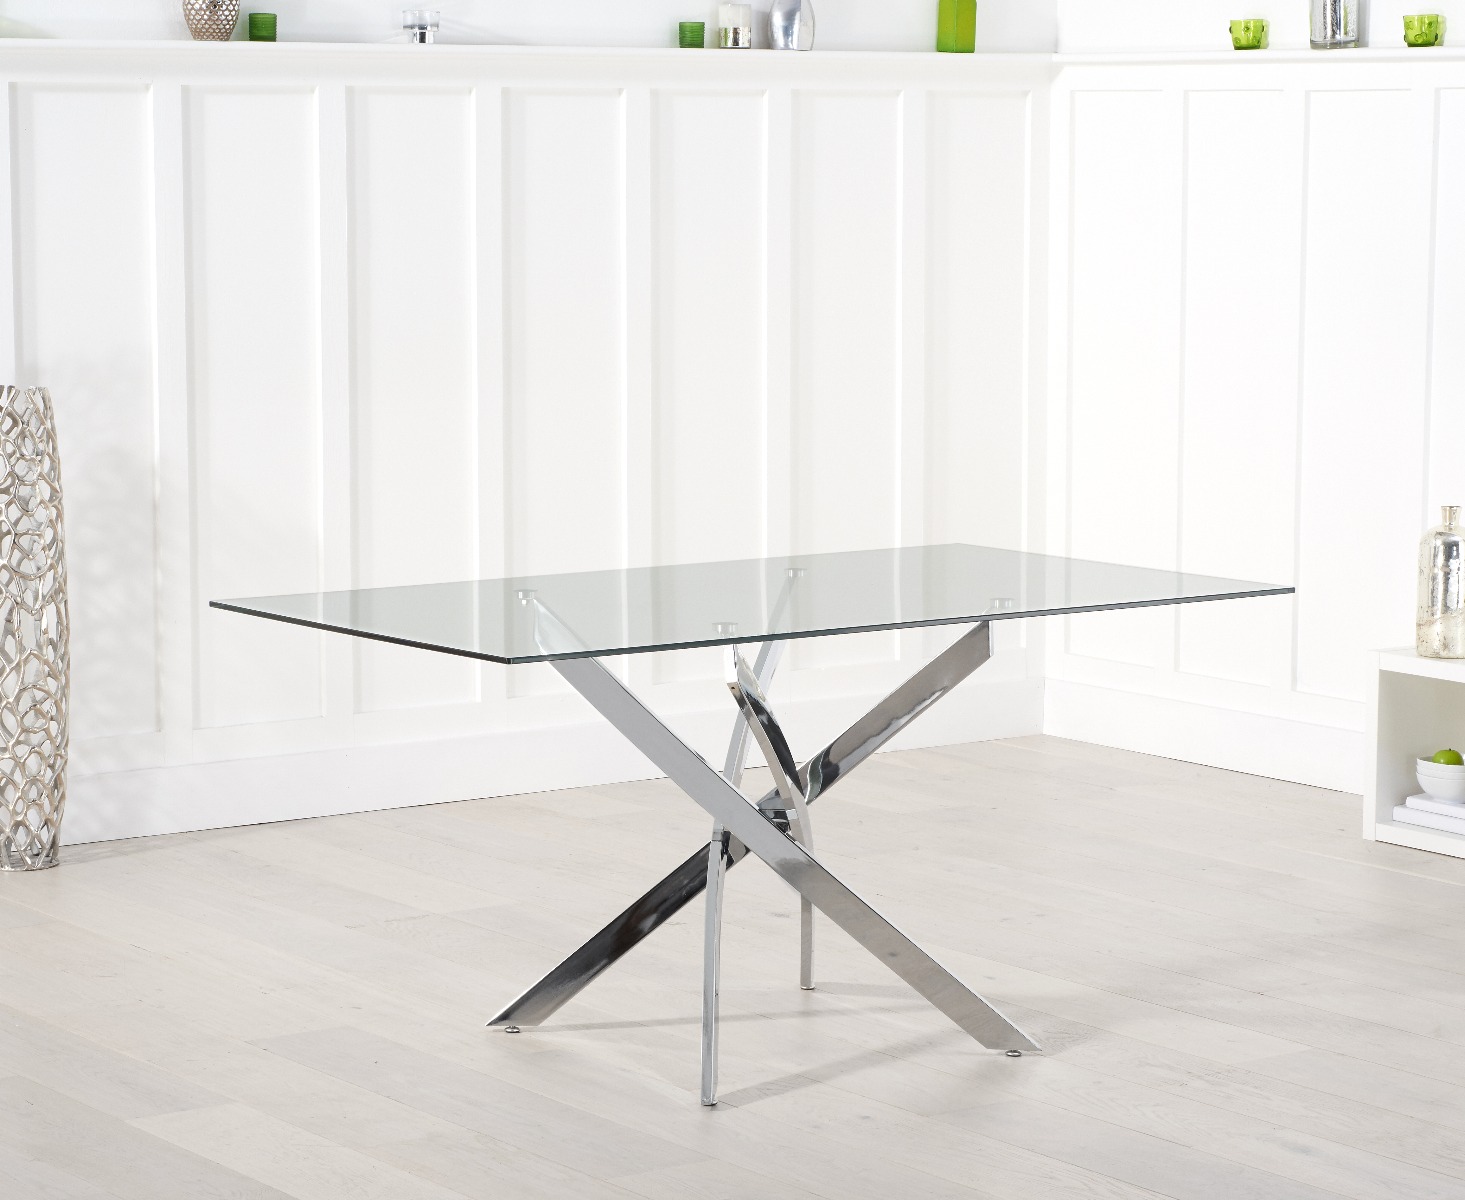 Photo 5 of Denver 160cm glass dining table with 6 grey gianni chairs